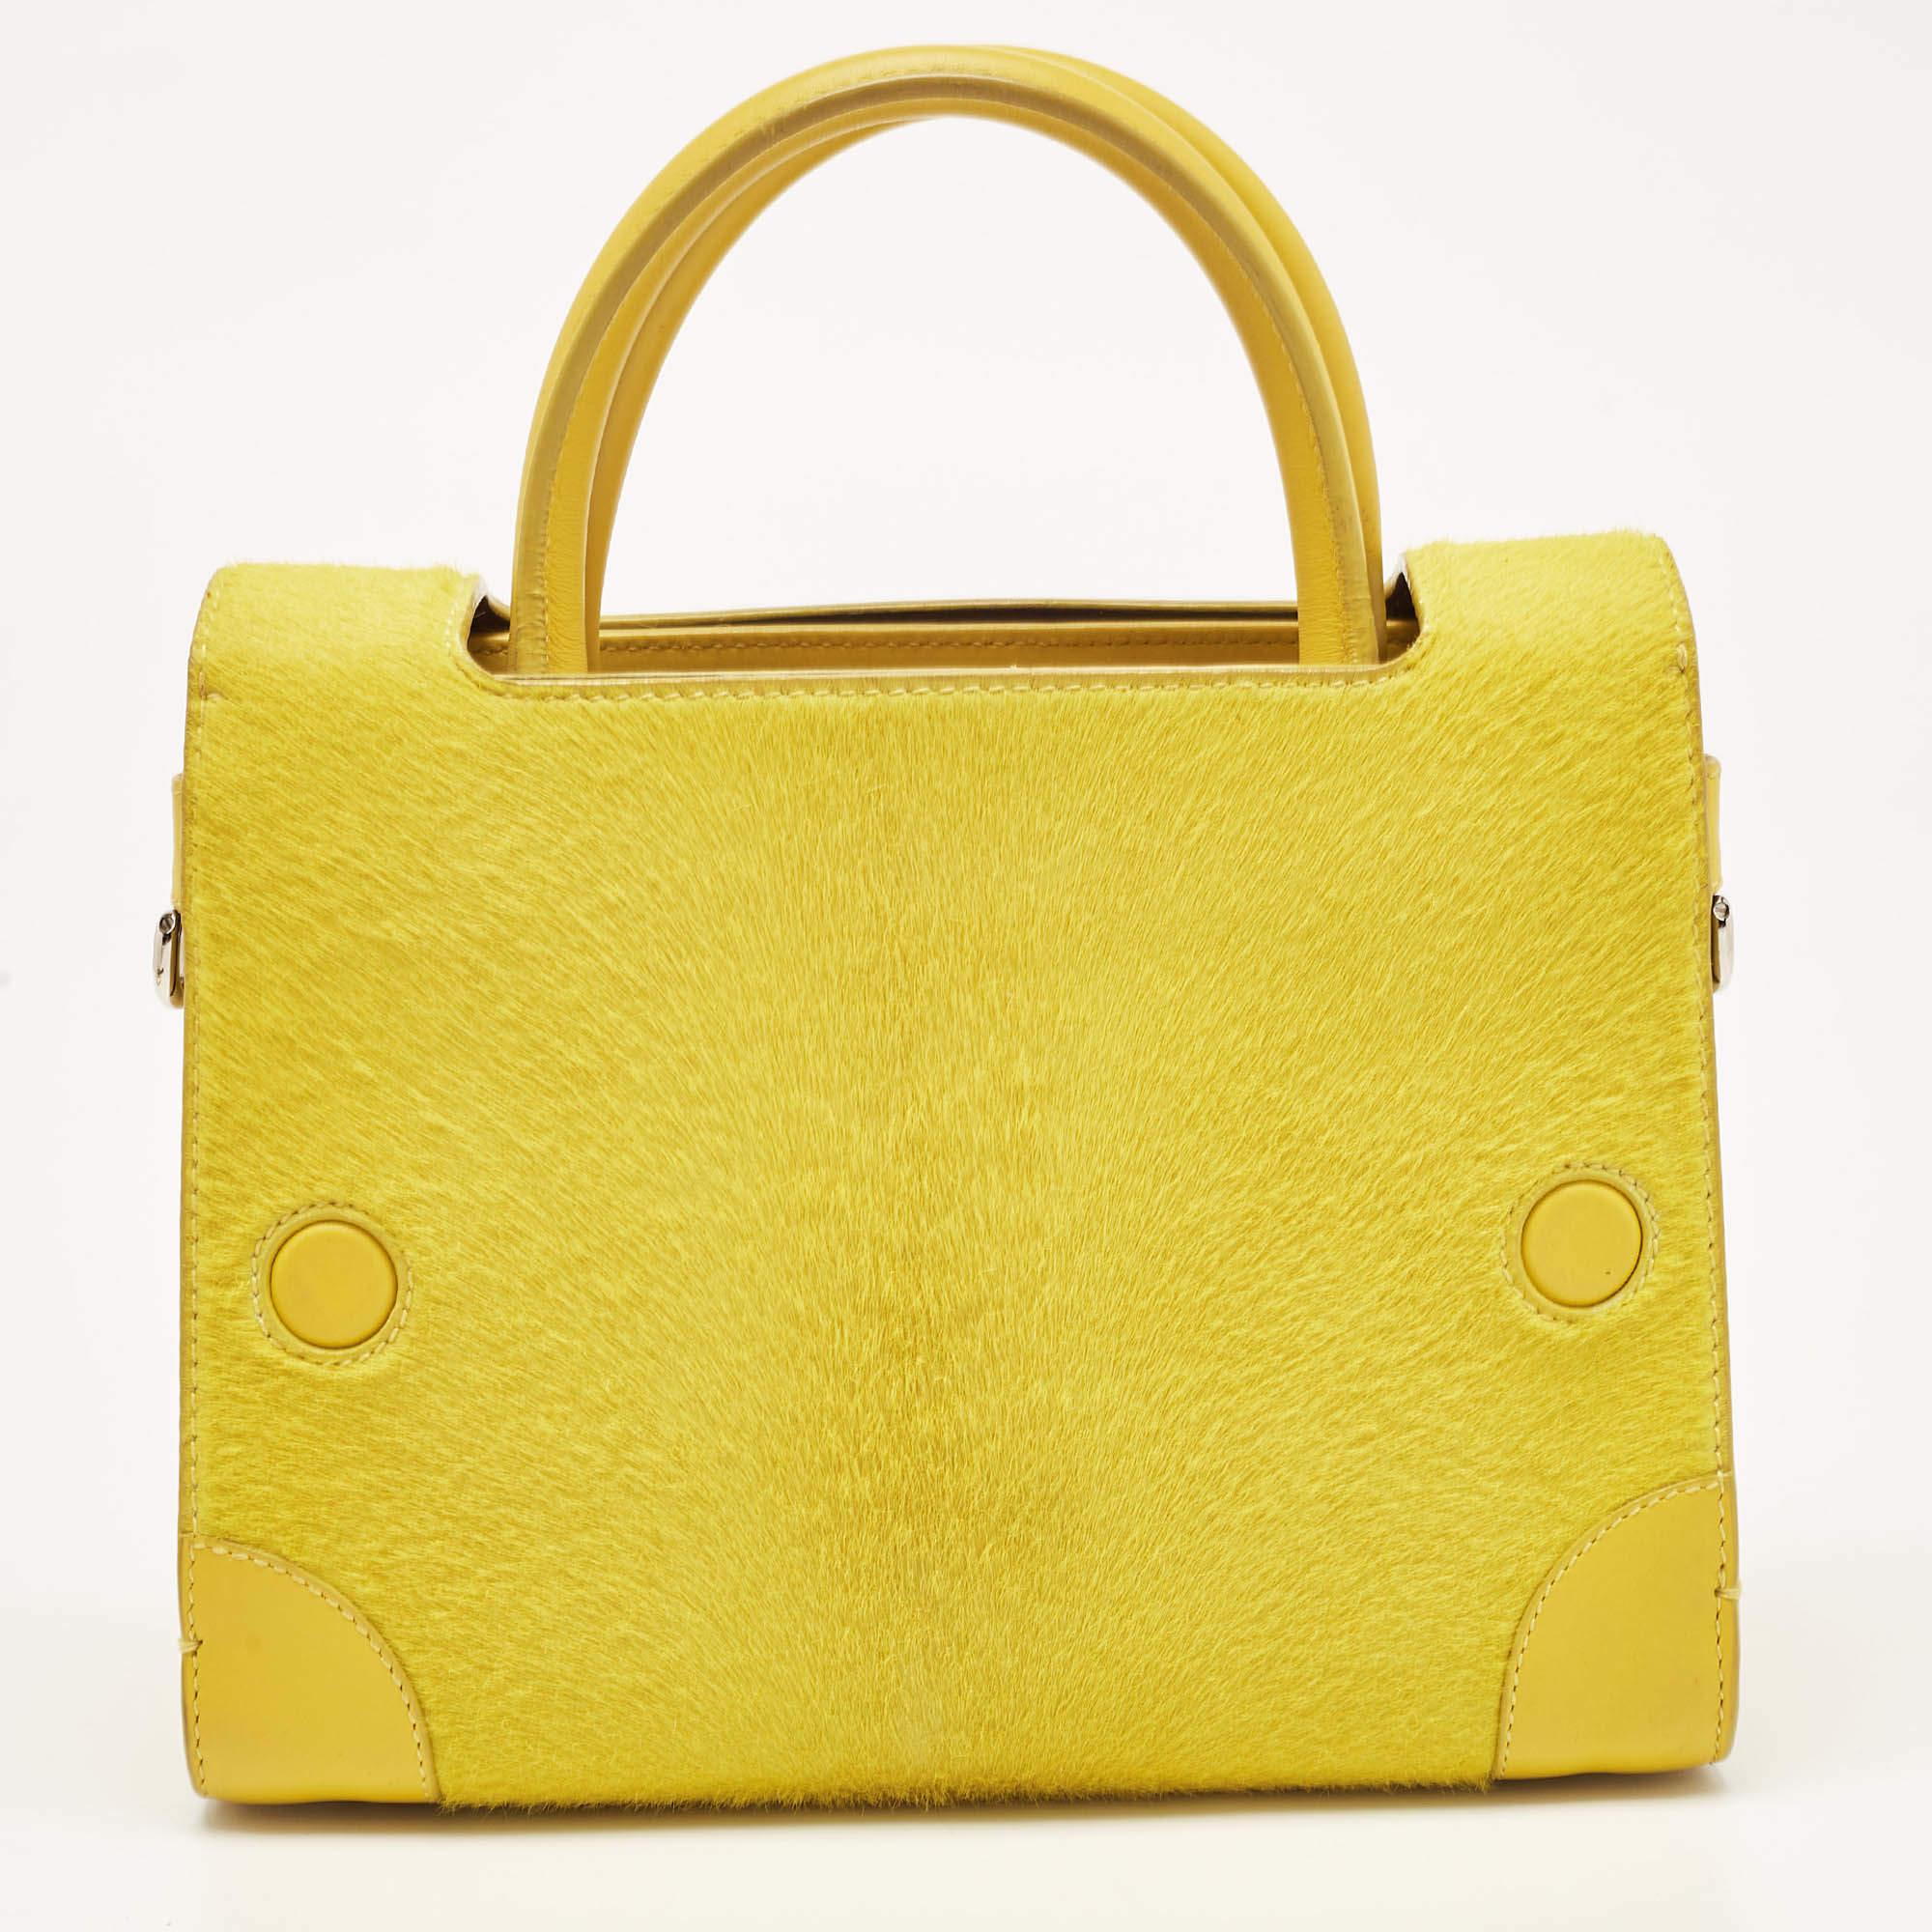 Women's Dior Yellow Leather and Calfhair Mini Diorever Tote